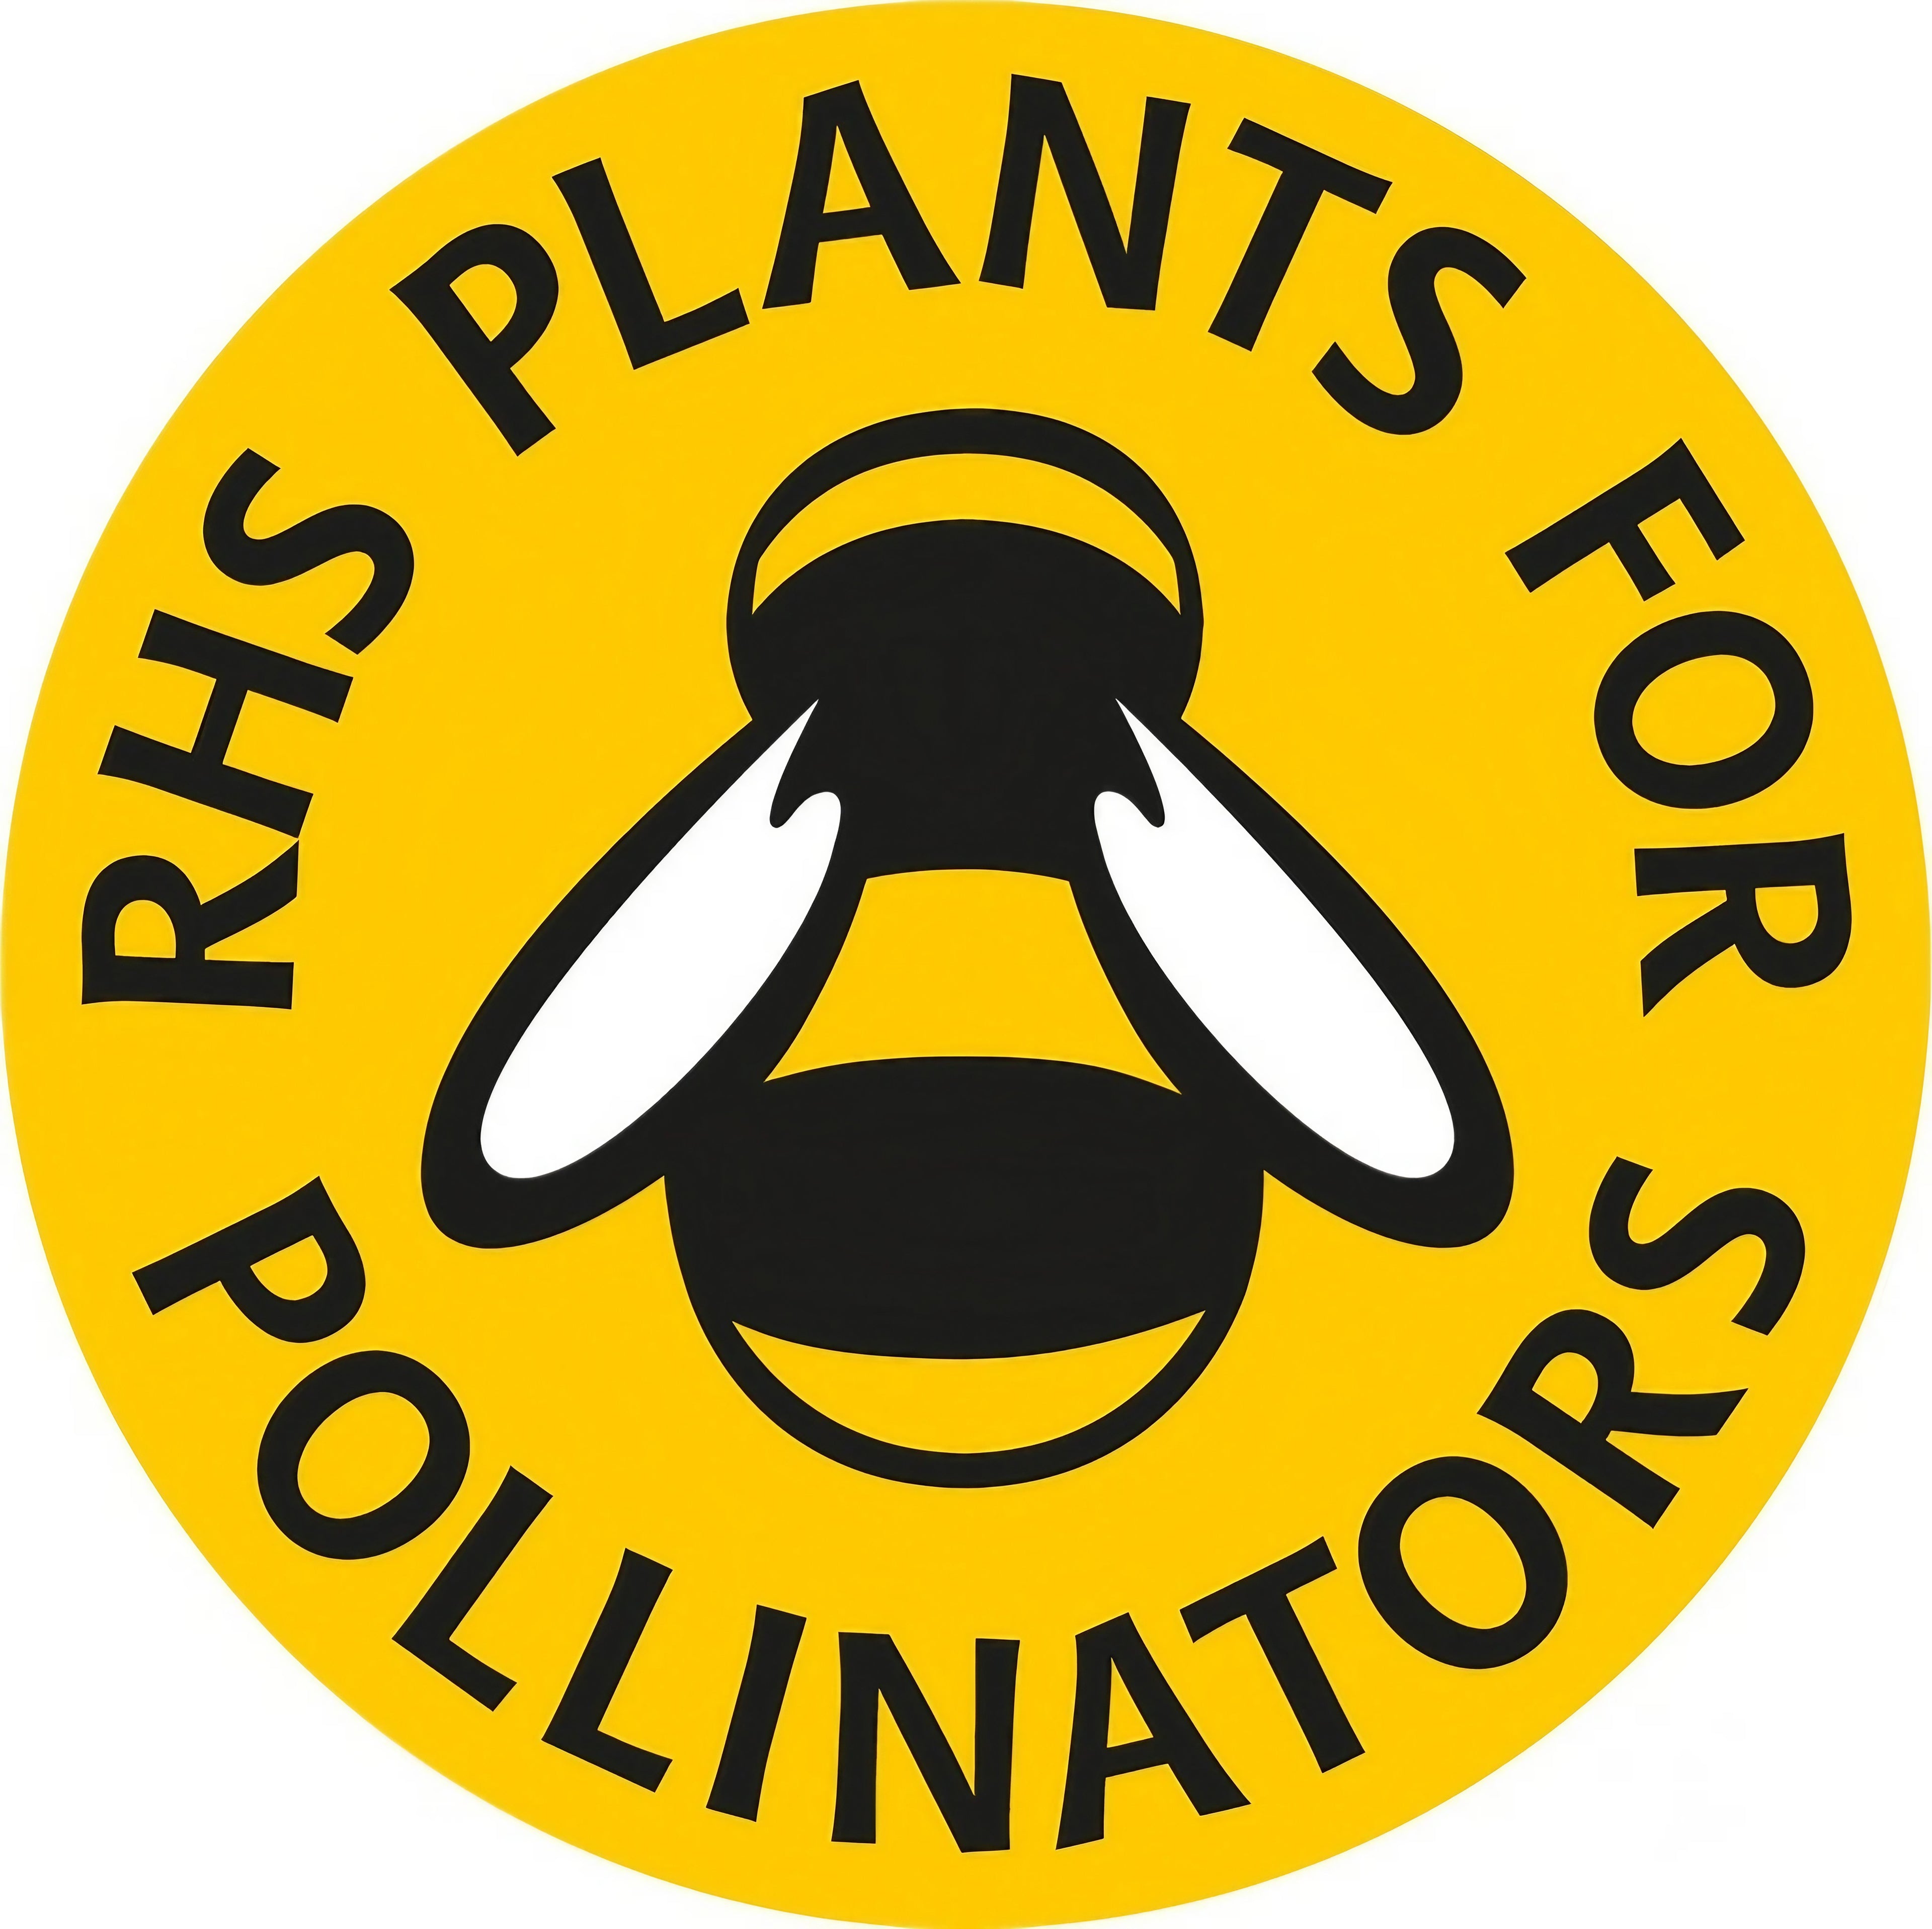 Certified RHS Plants for Pollinators emblem indicating Aster Ostrich Plume&